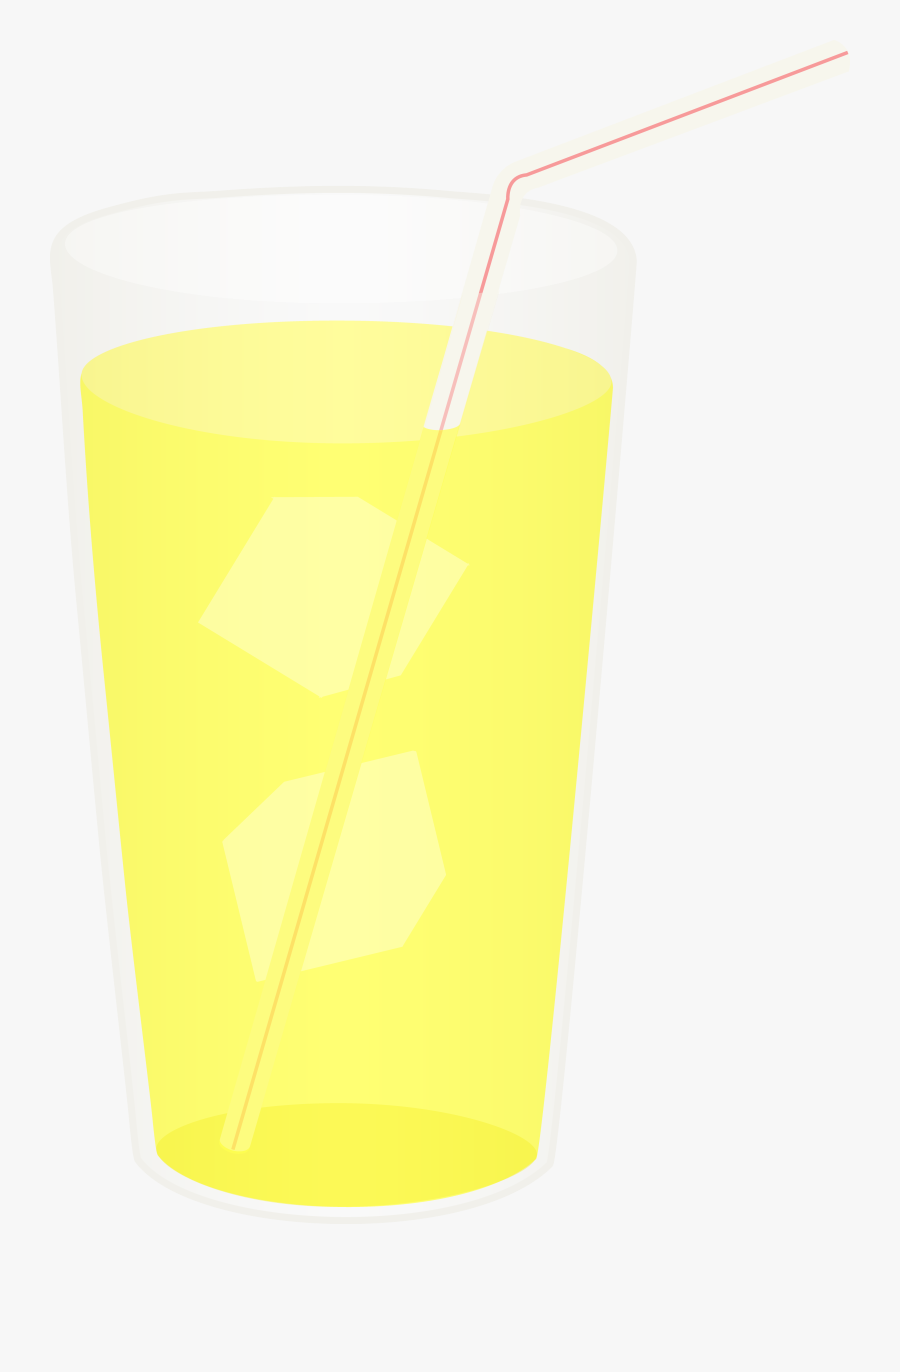 Clip Art Collection Of Free Drawing - Lemonade Glass Transparent Clip Art, Transparent Clipart